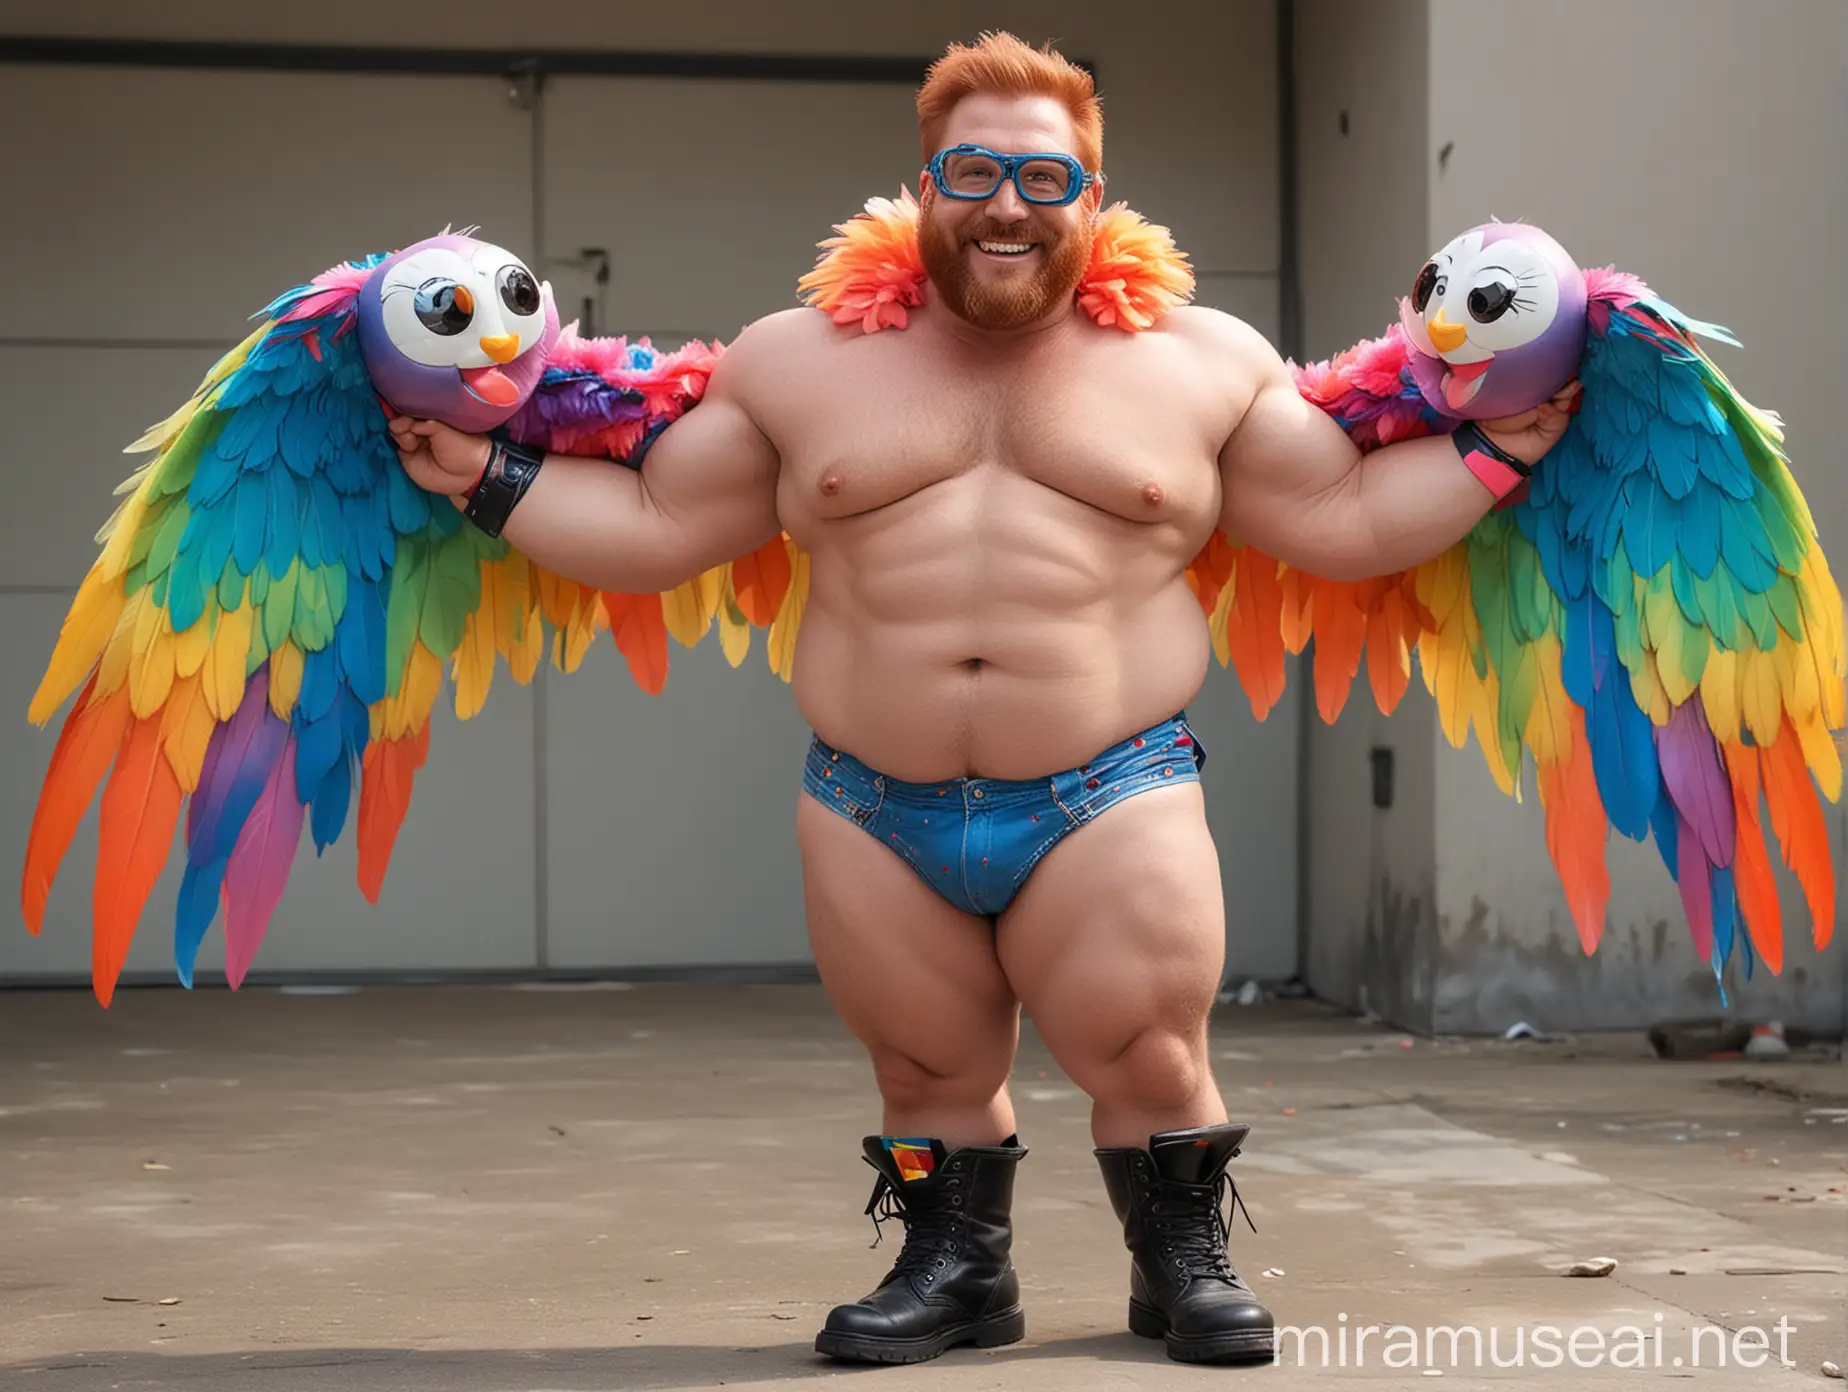 Topless 40s Smiling Ultra Chunky Redhead Bodybuilder Daddy Big Eyes with Beard Wearing Multi-Highlighter Bright Rainbow Colored See Through huge Eagle Wings Shoulder Jacket short shorts low leather boots and Flexing his Big Strong Arm with Doraemon Goggles